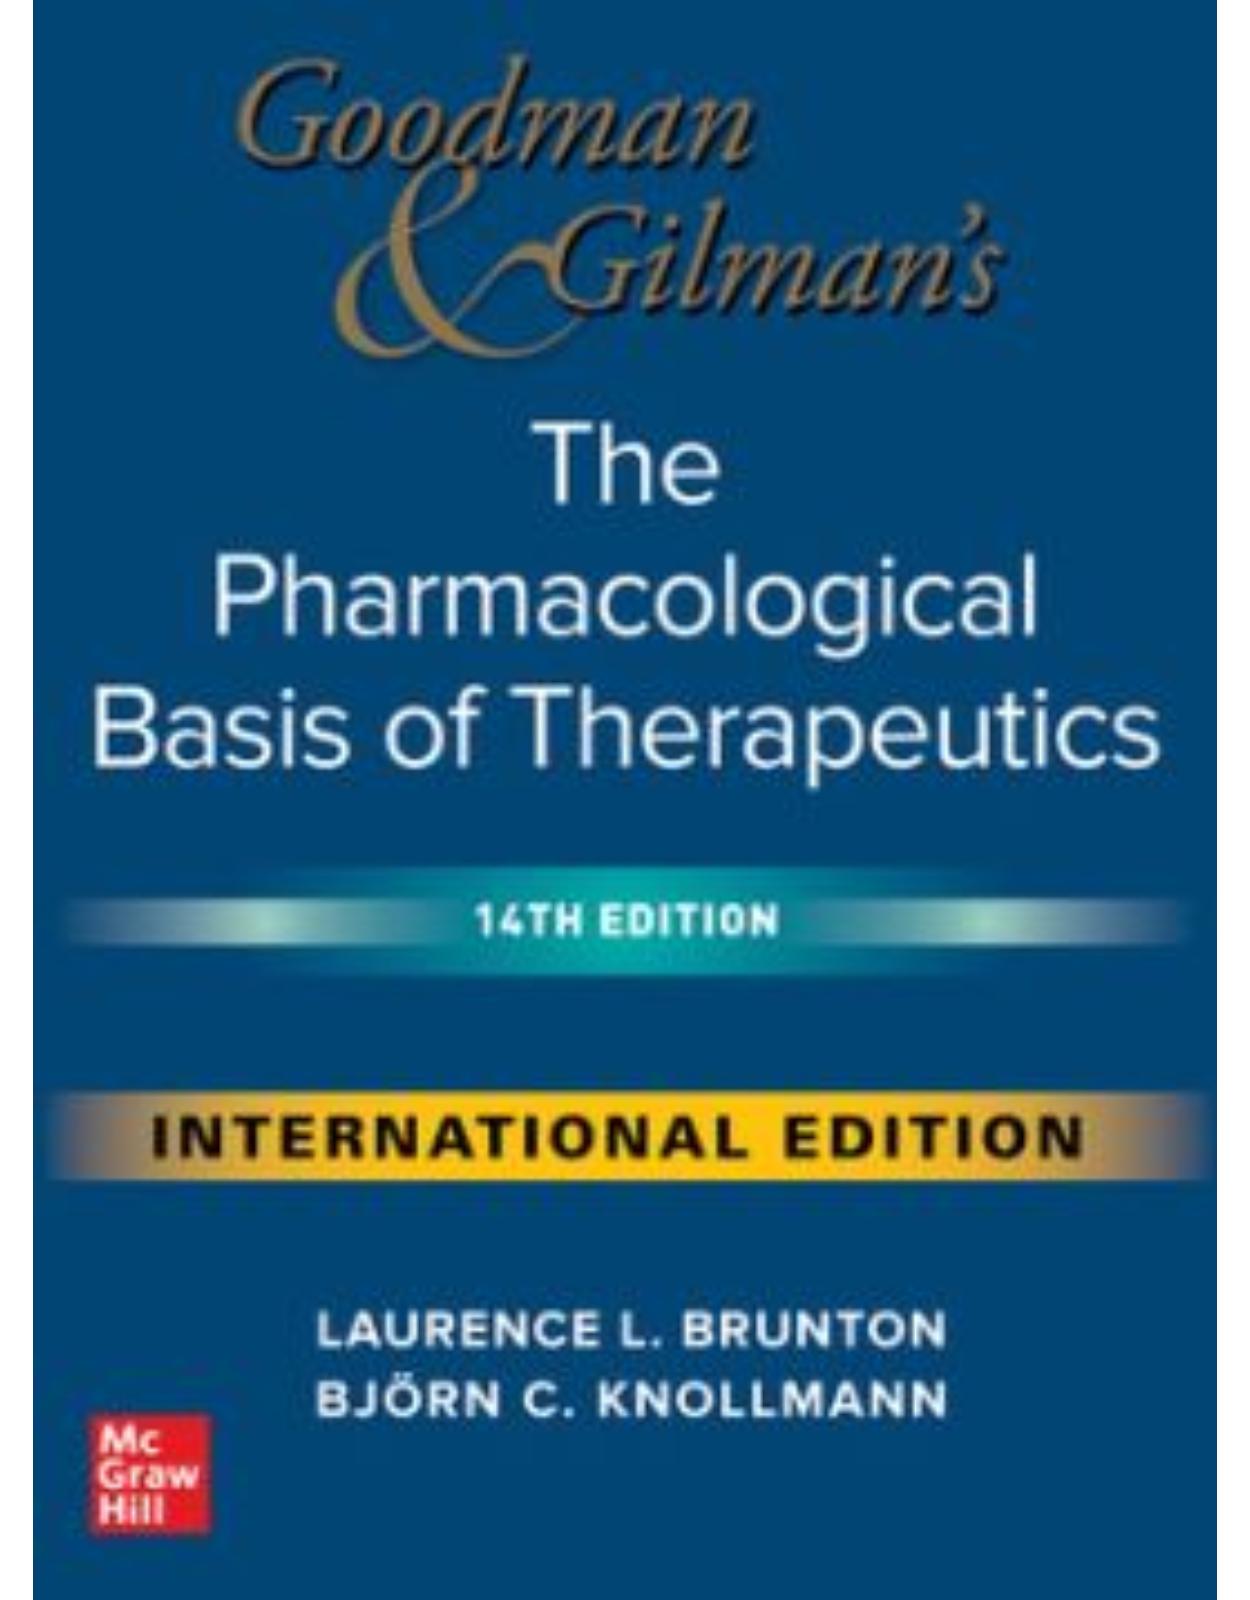 Goodman and Gilmans The Pharmacological Basis of Therapeutics, 14th Edition